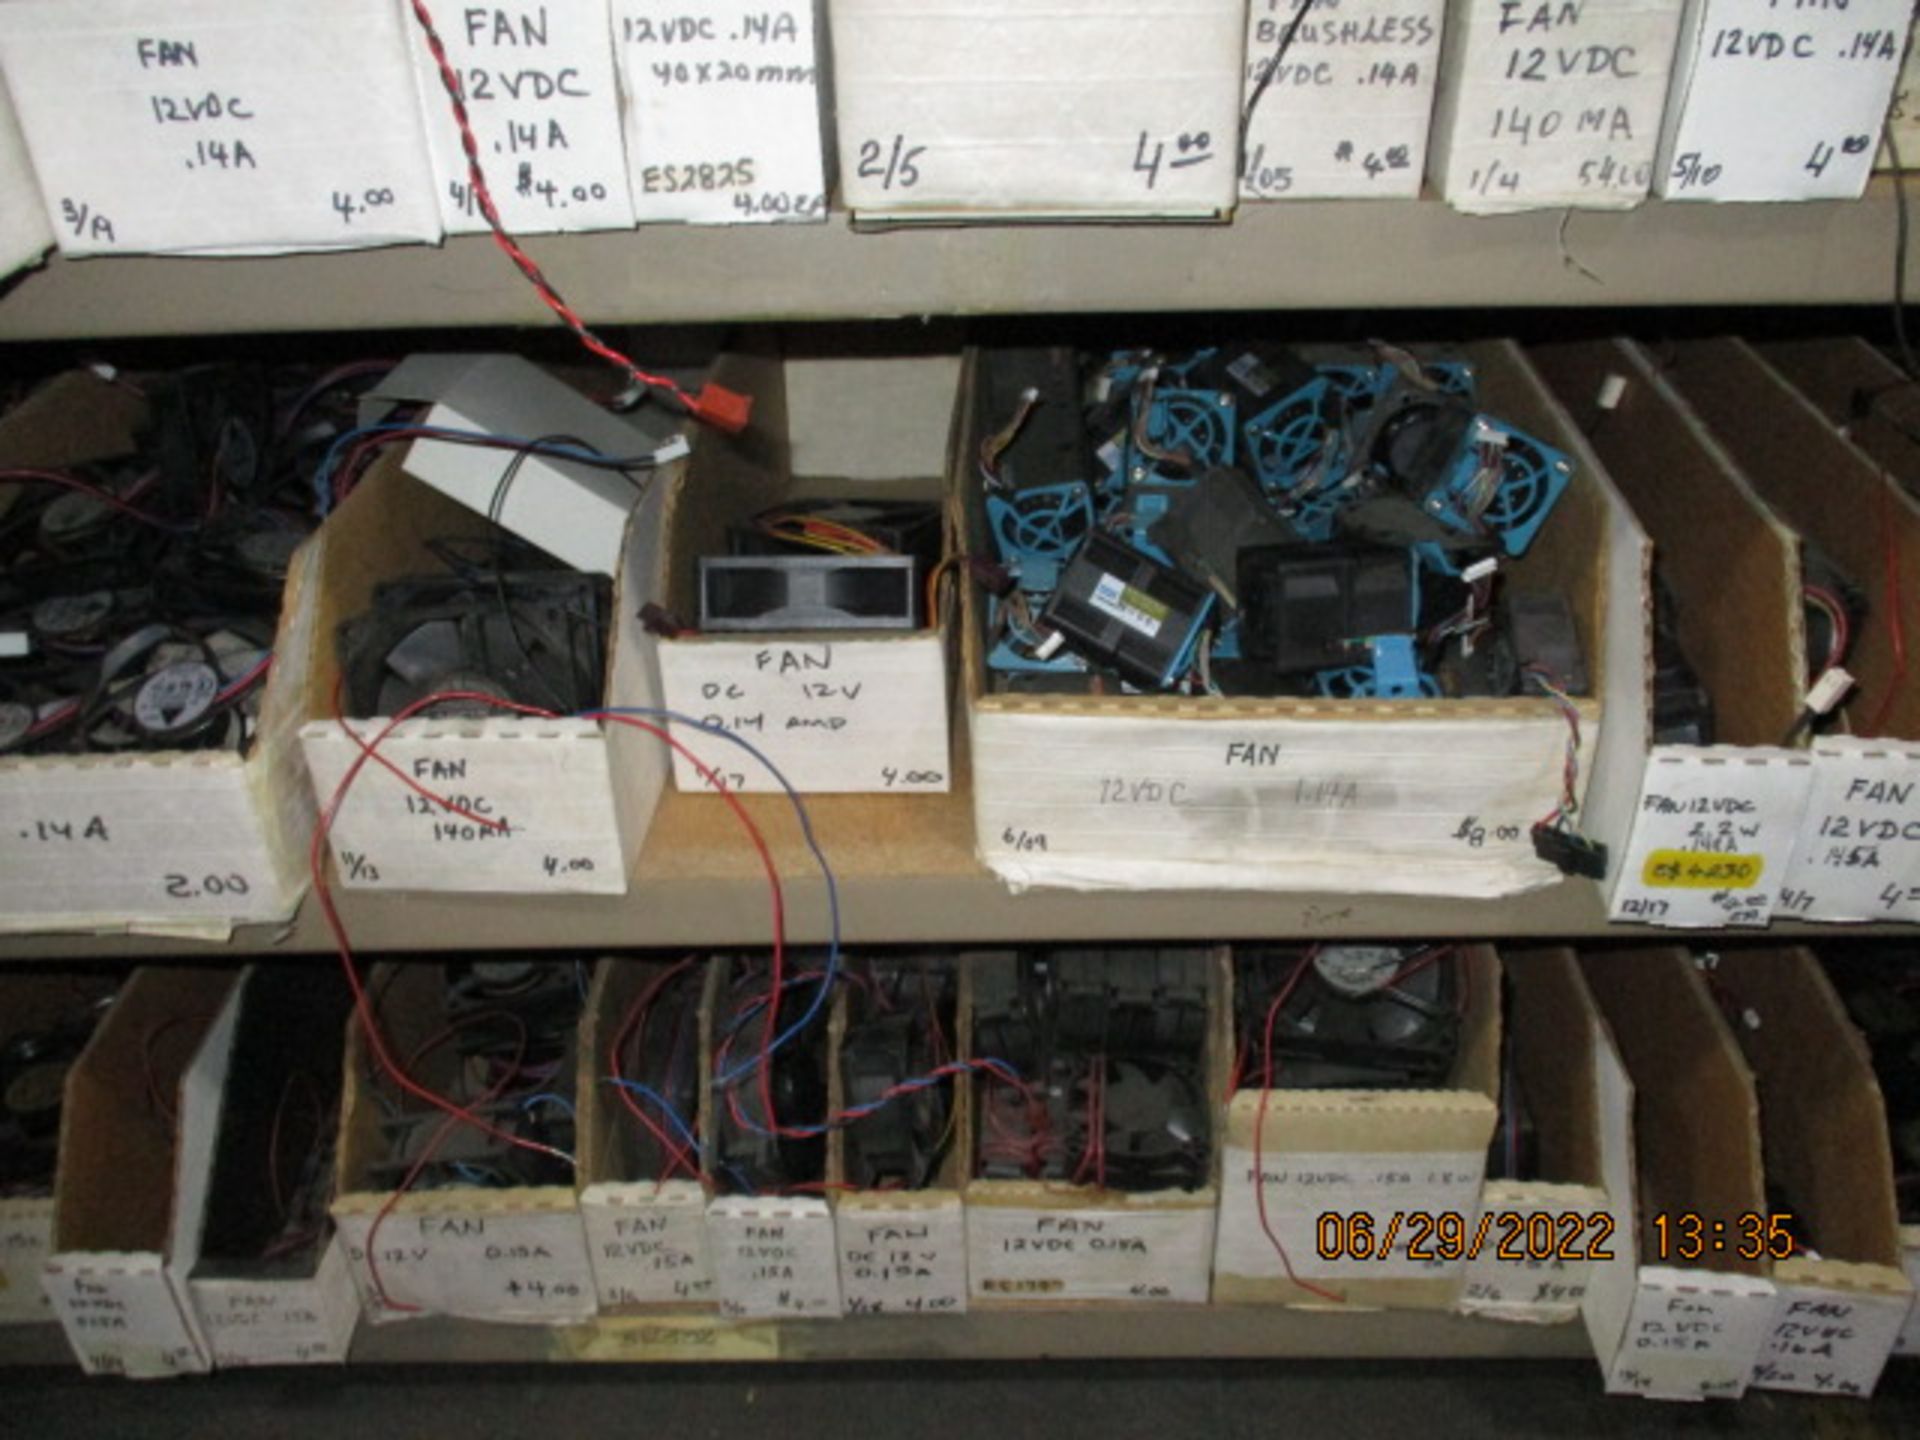 CONTENTS OF SHELVING UNIT CONSISTING OF ASSORTMENT OF FANS - Image 12 of 13